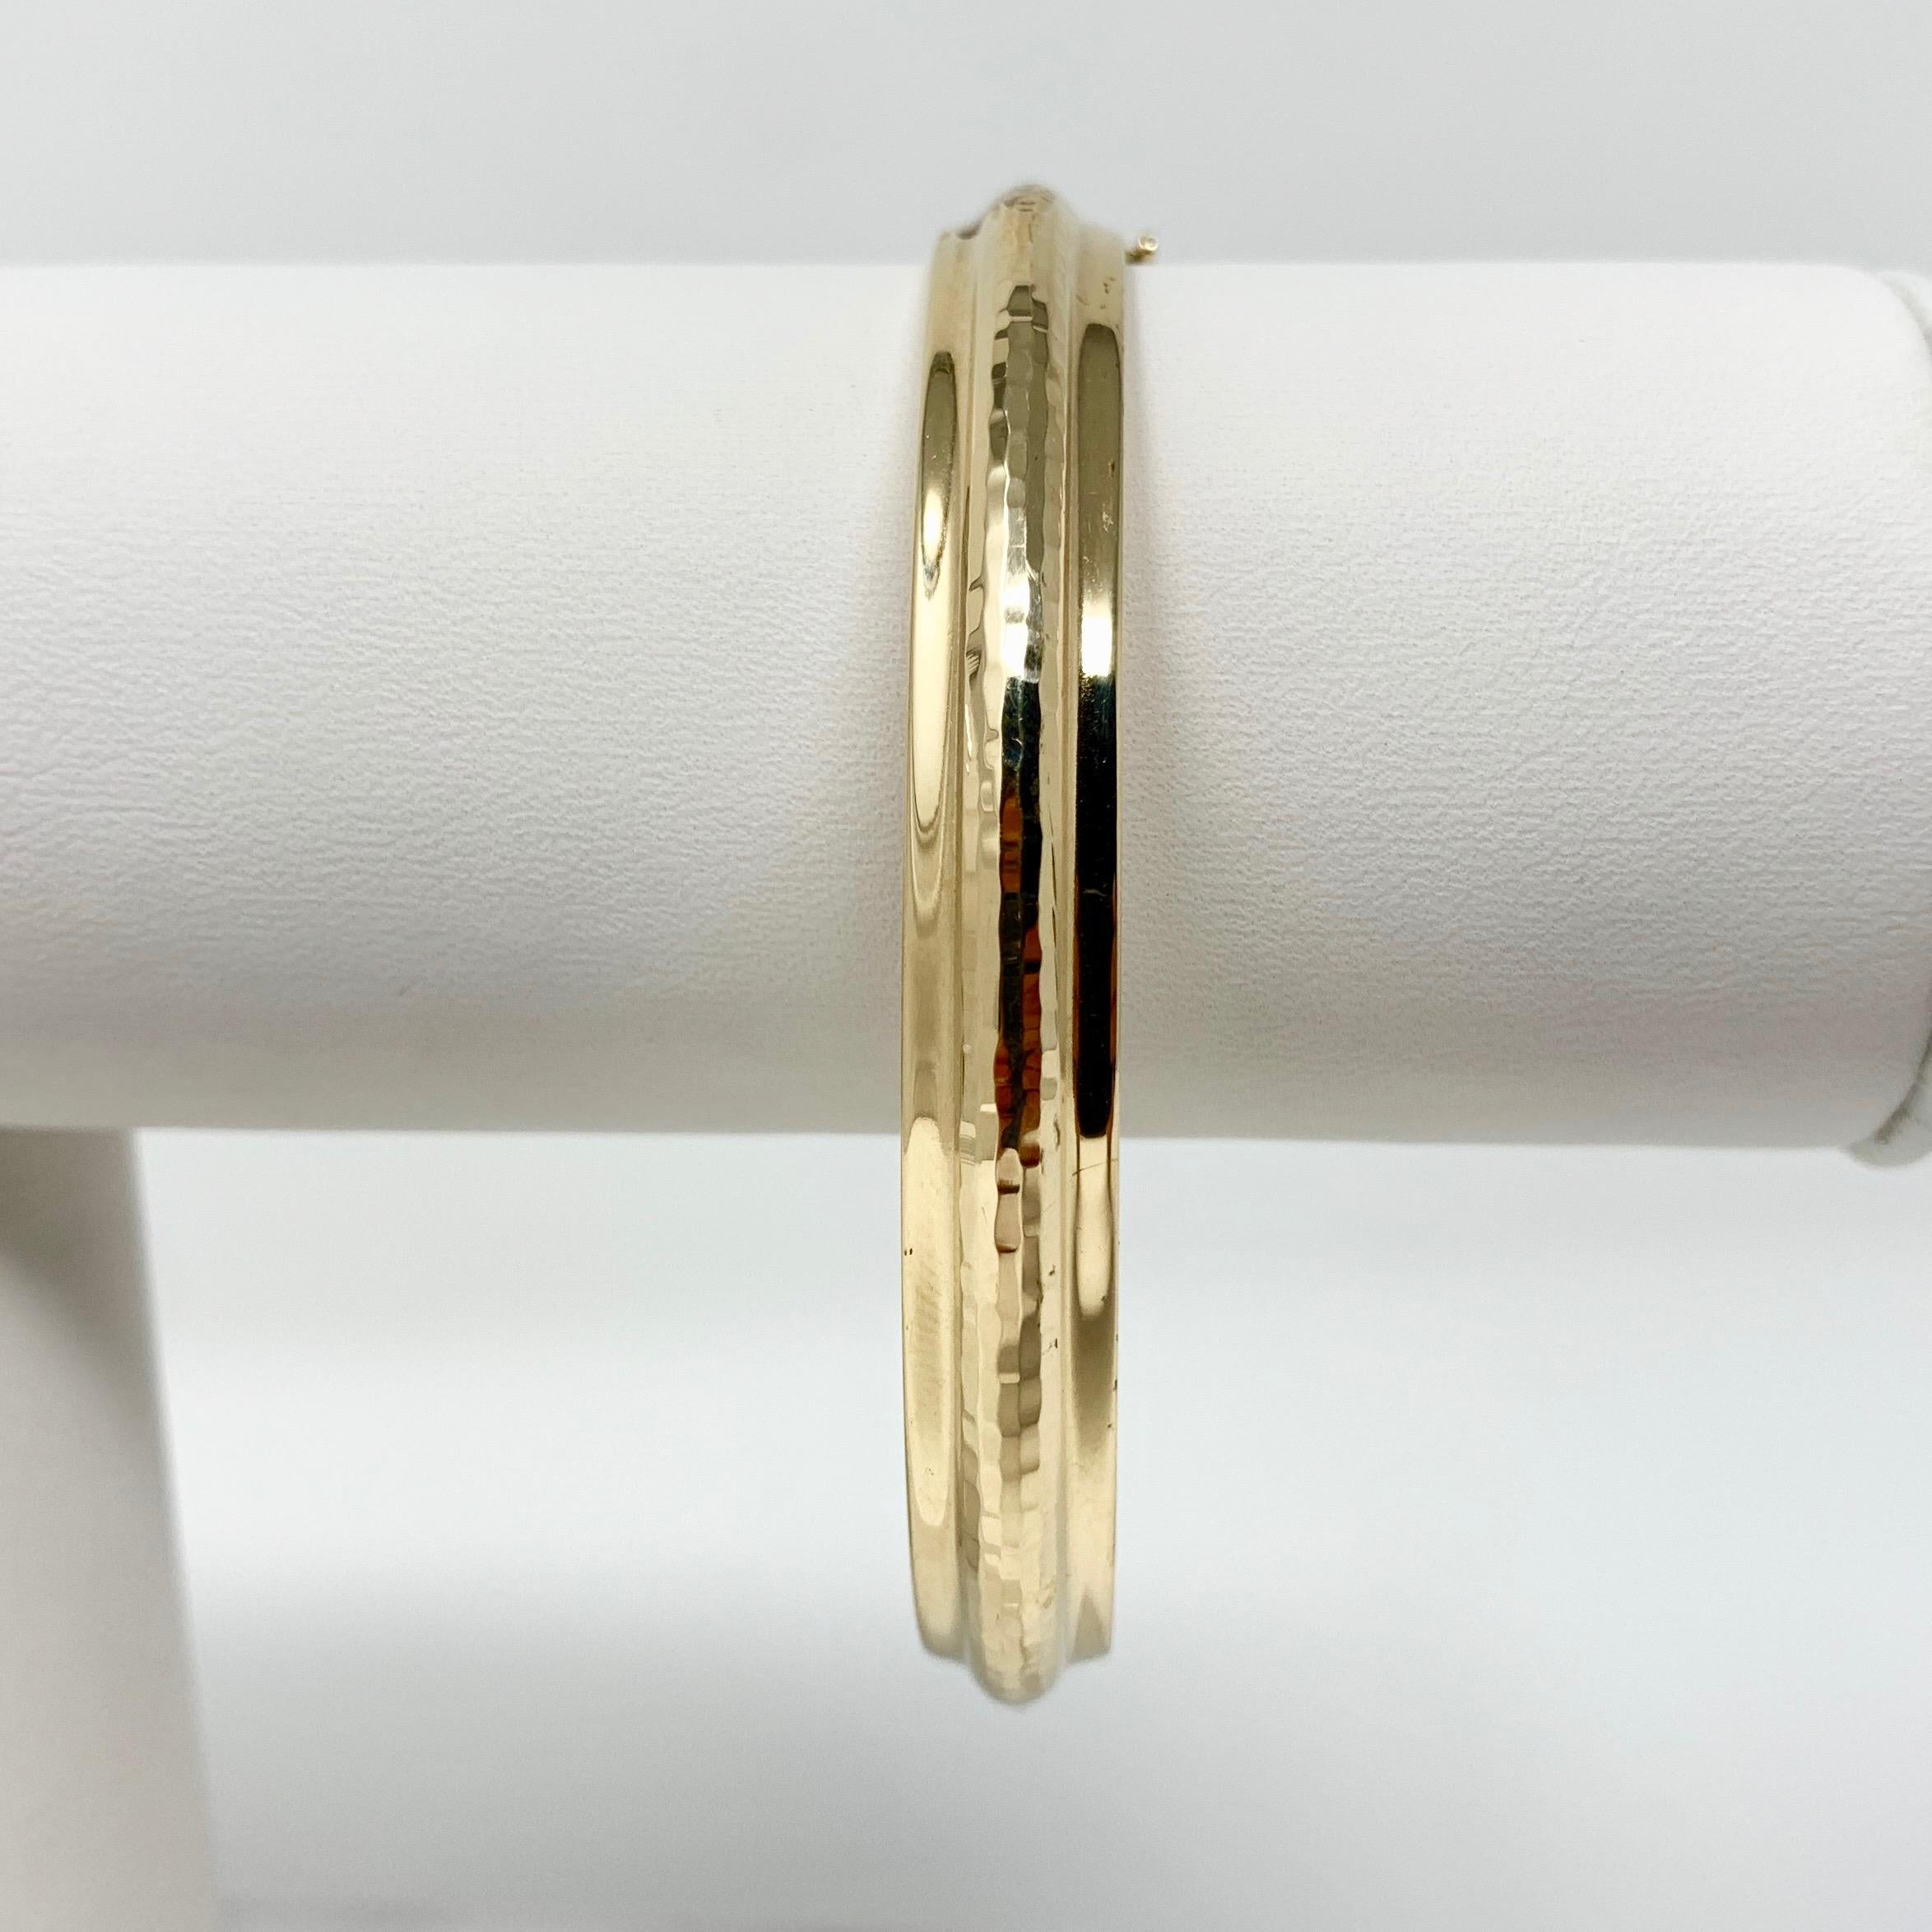 14k Yellow Gold Polished Hammered Texture Bangle Bracelet 7.5 Inches

Condition:  Excellent Condition, Professionally Cleaned and Polished
Metal:  14k Gold (Marked, and Professionally Tested)
Weight:  8.8g
Length:  7.5 Inches 
Width:  8mm 
Closure: 